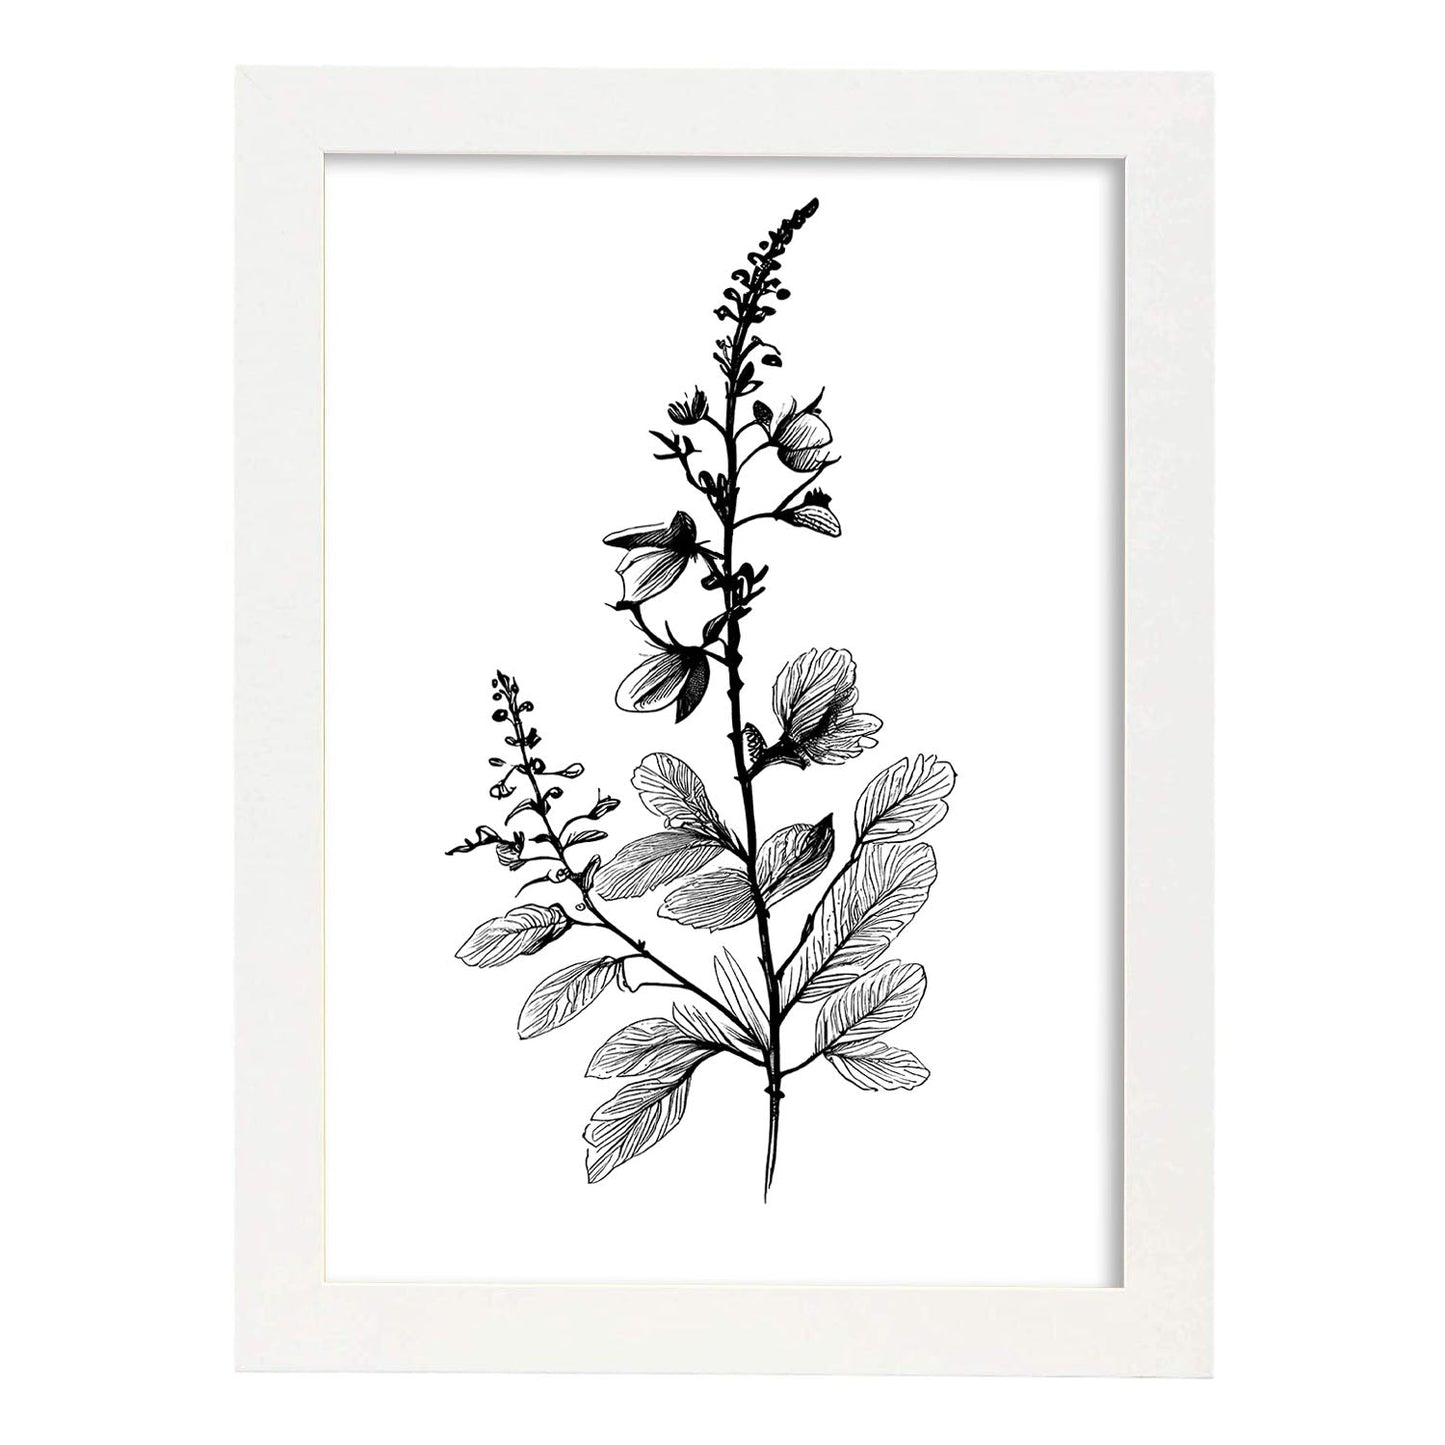 Nacnic Speedwell Minimalist Line Art_1. Aesthetic Wall Art Prints for Bedroom or Living Room Design.